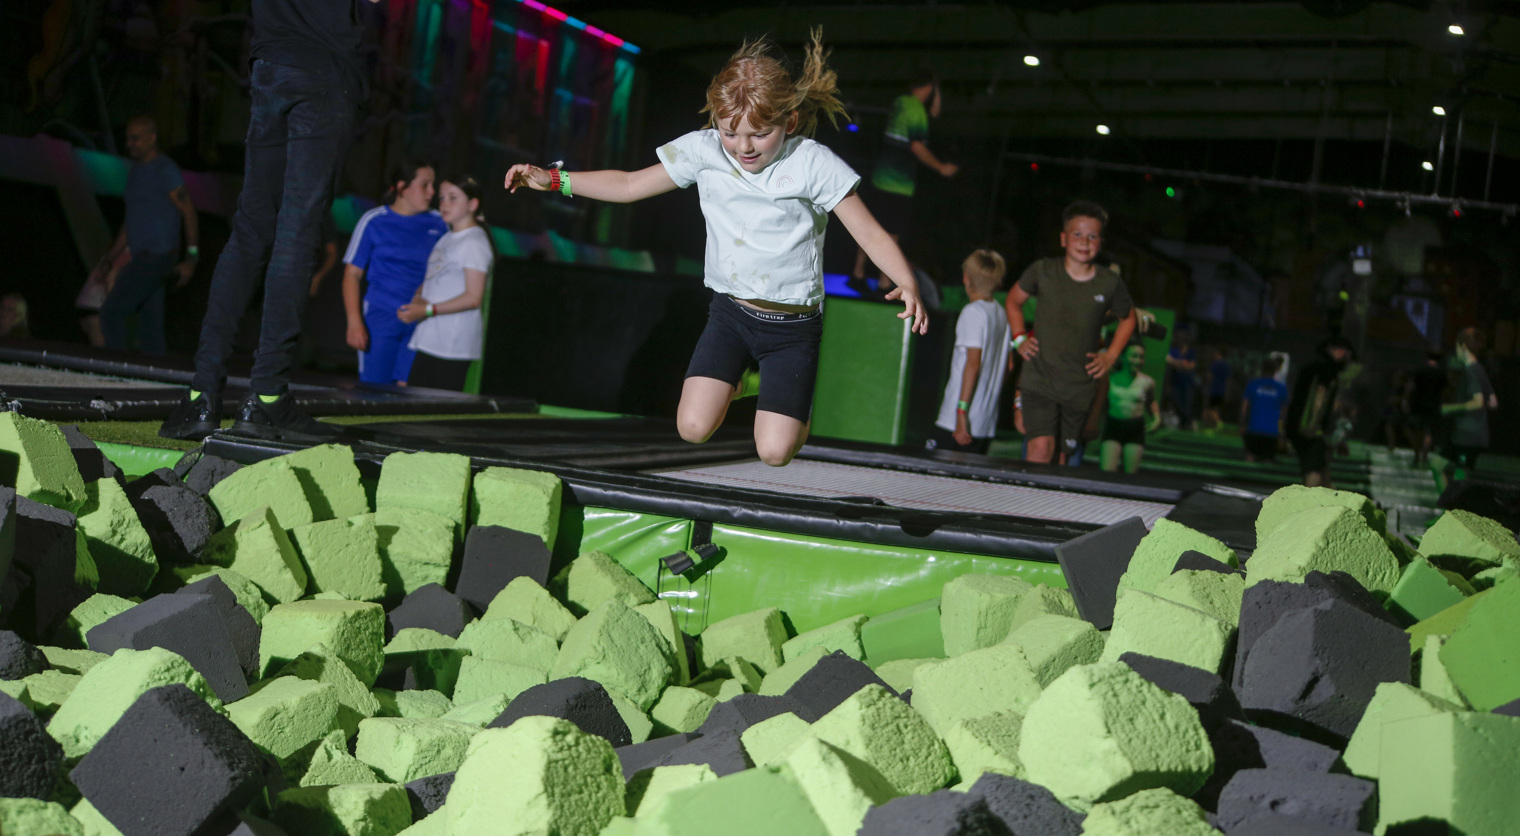 Girl jumping into Foam Pit at Flip Out UK